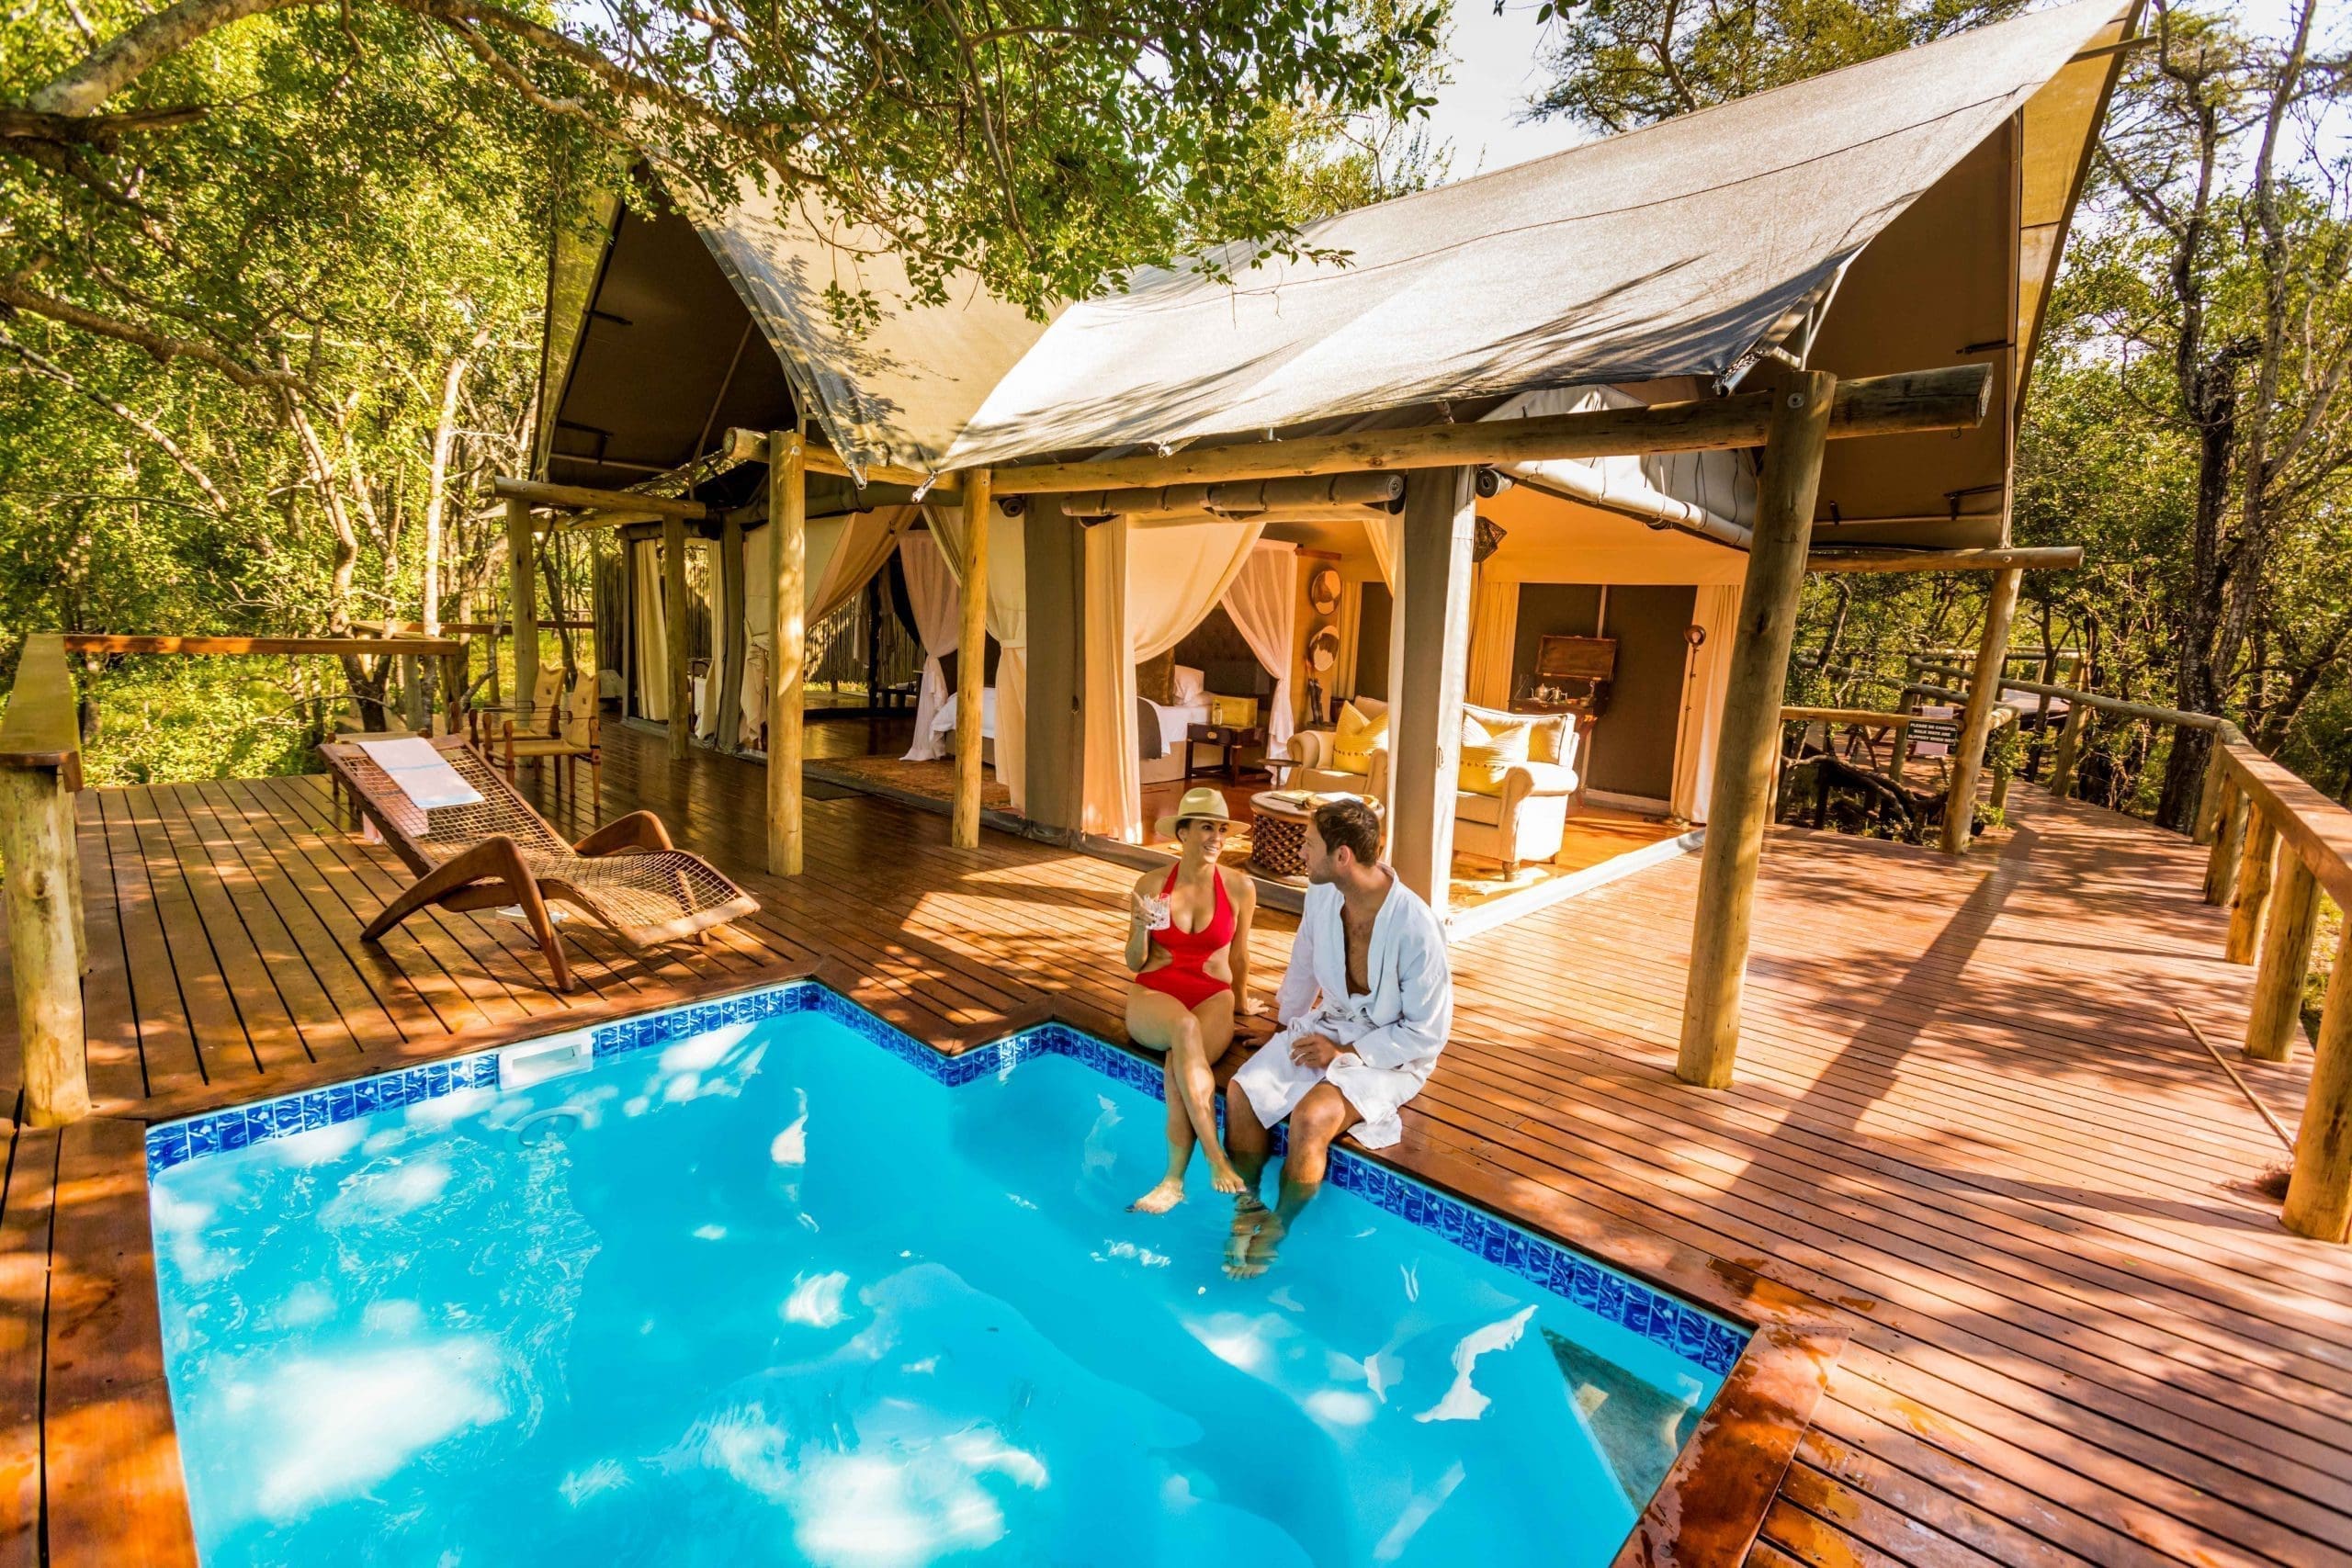 Intimate Safari Escapes for Discerning Travellers